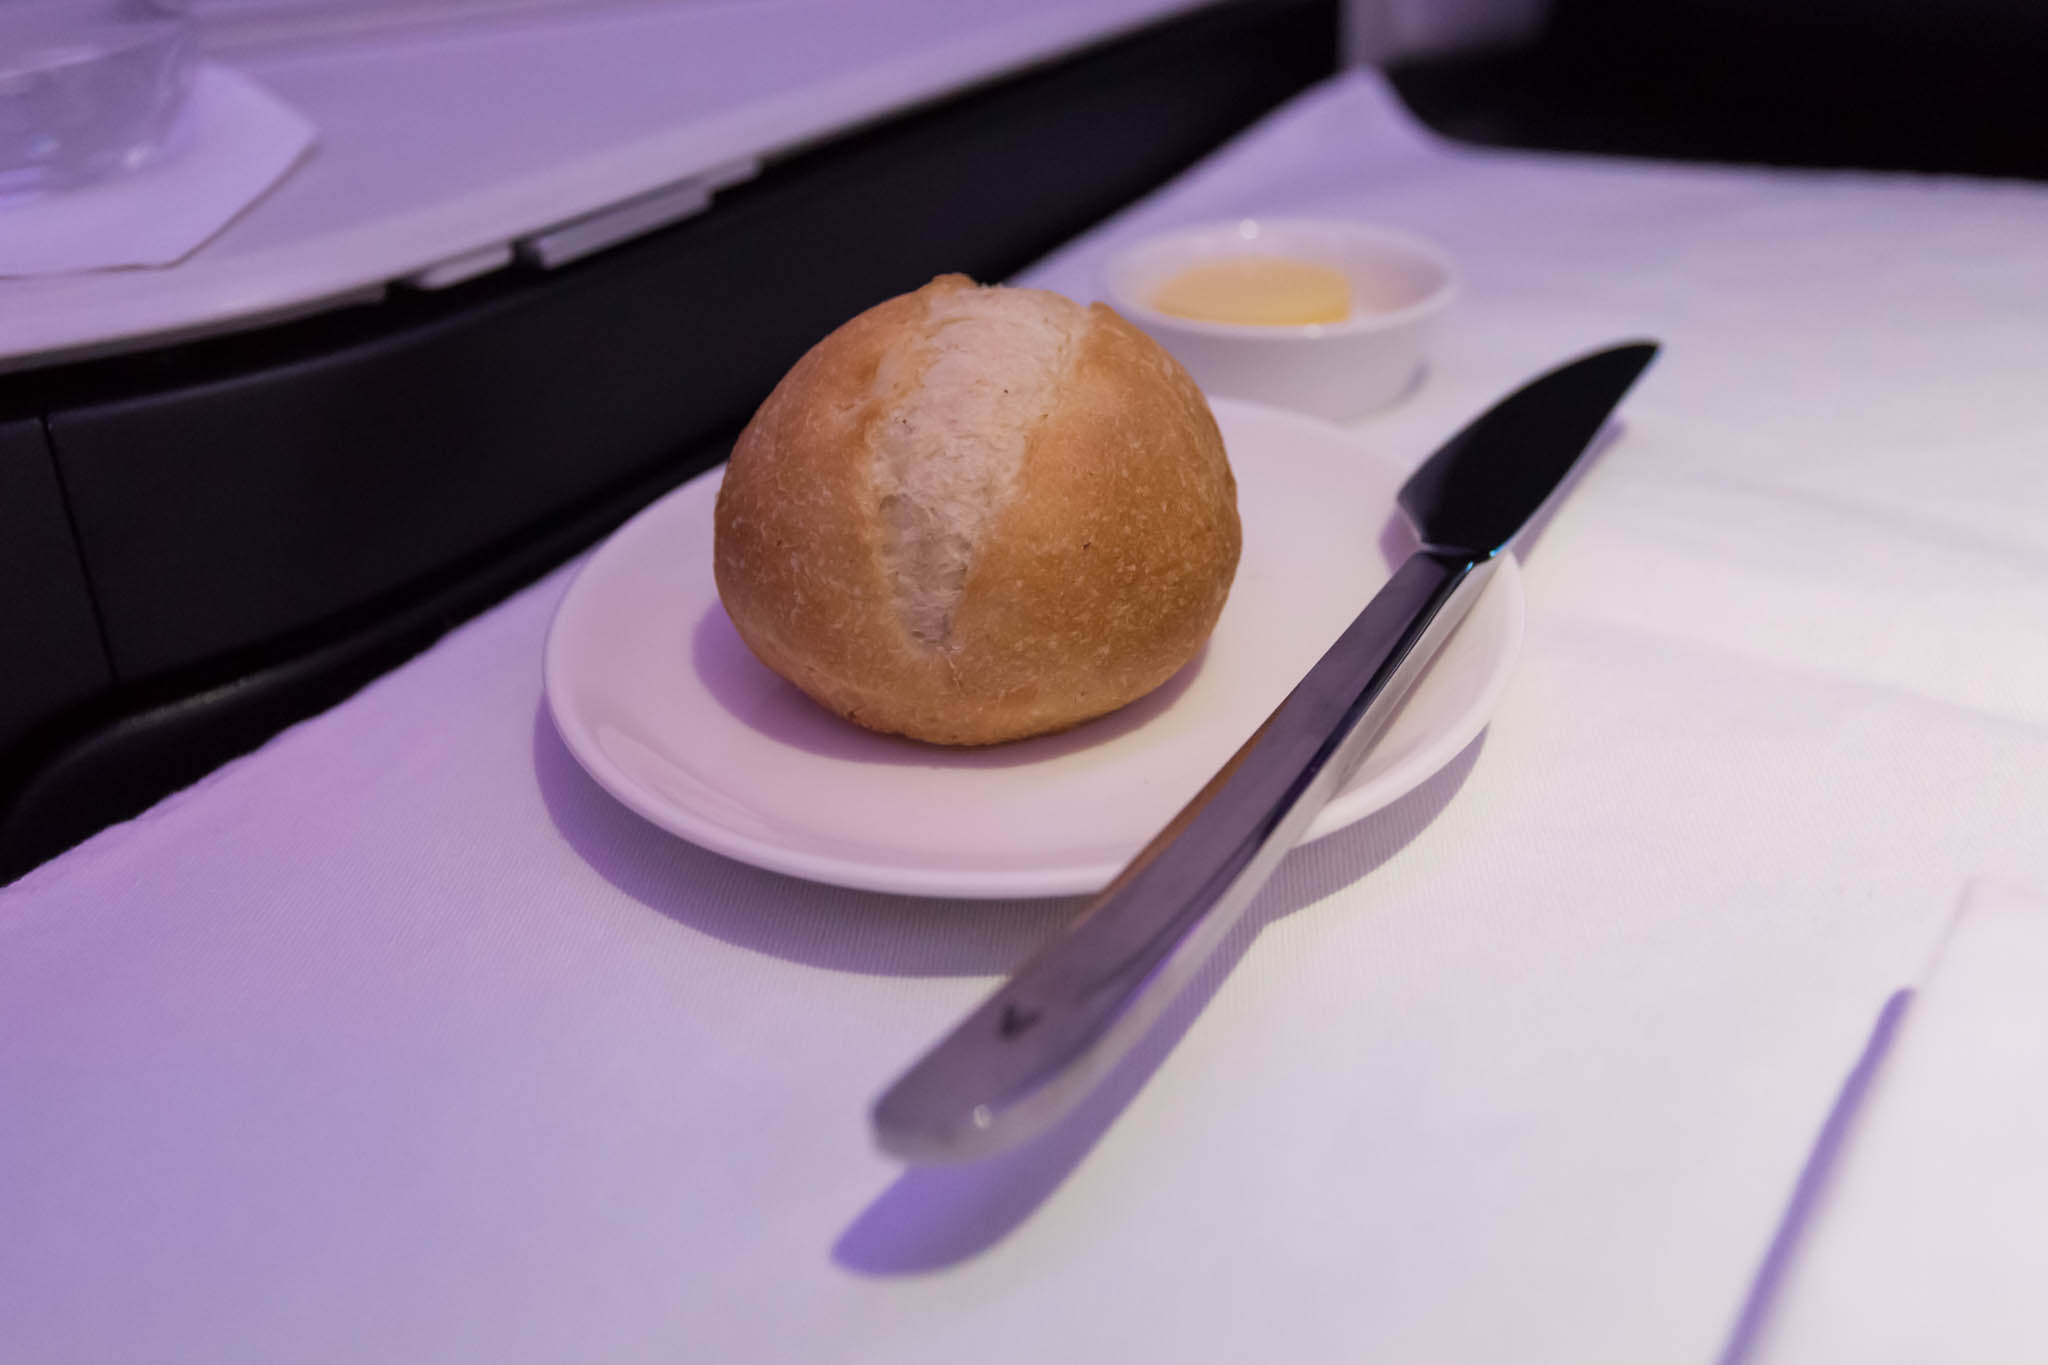 a plate with a roll on it and a knife on a table